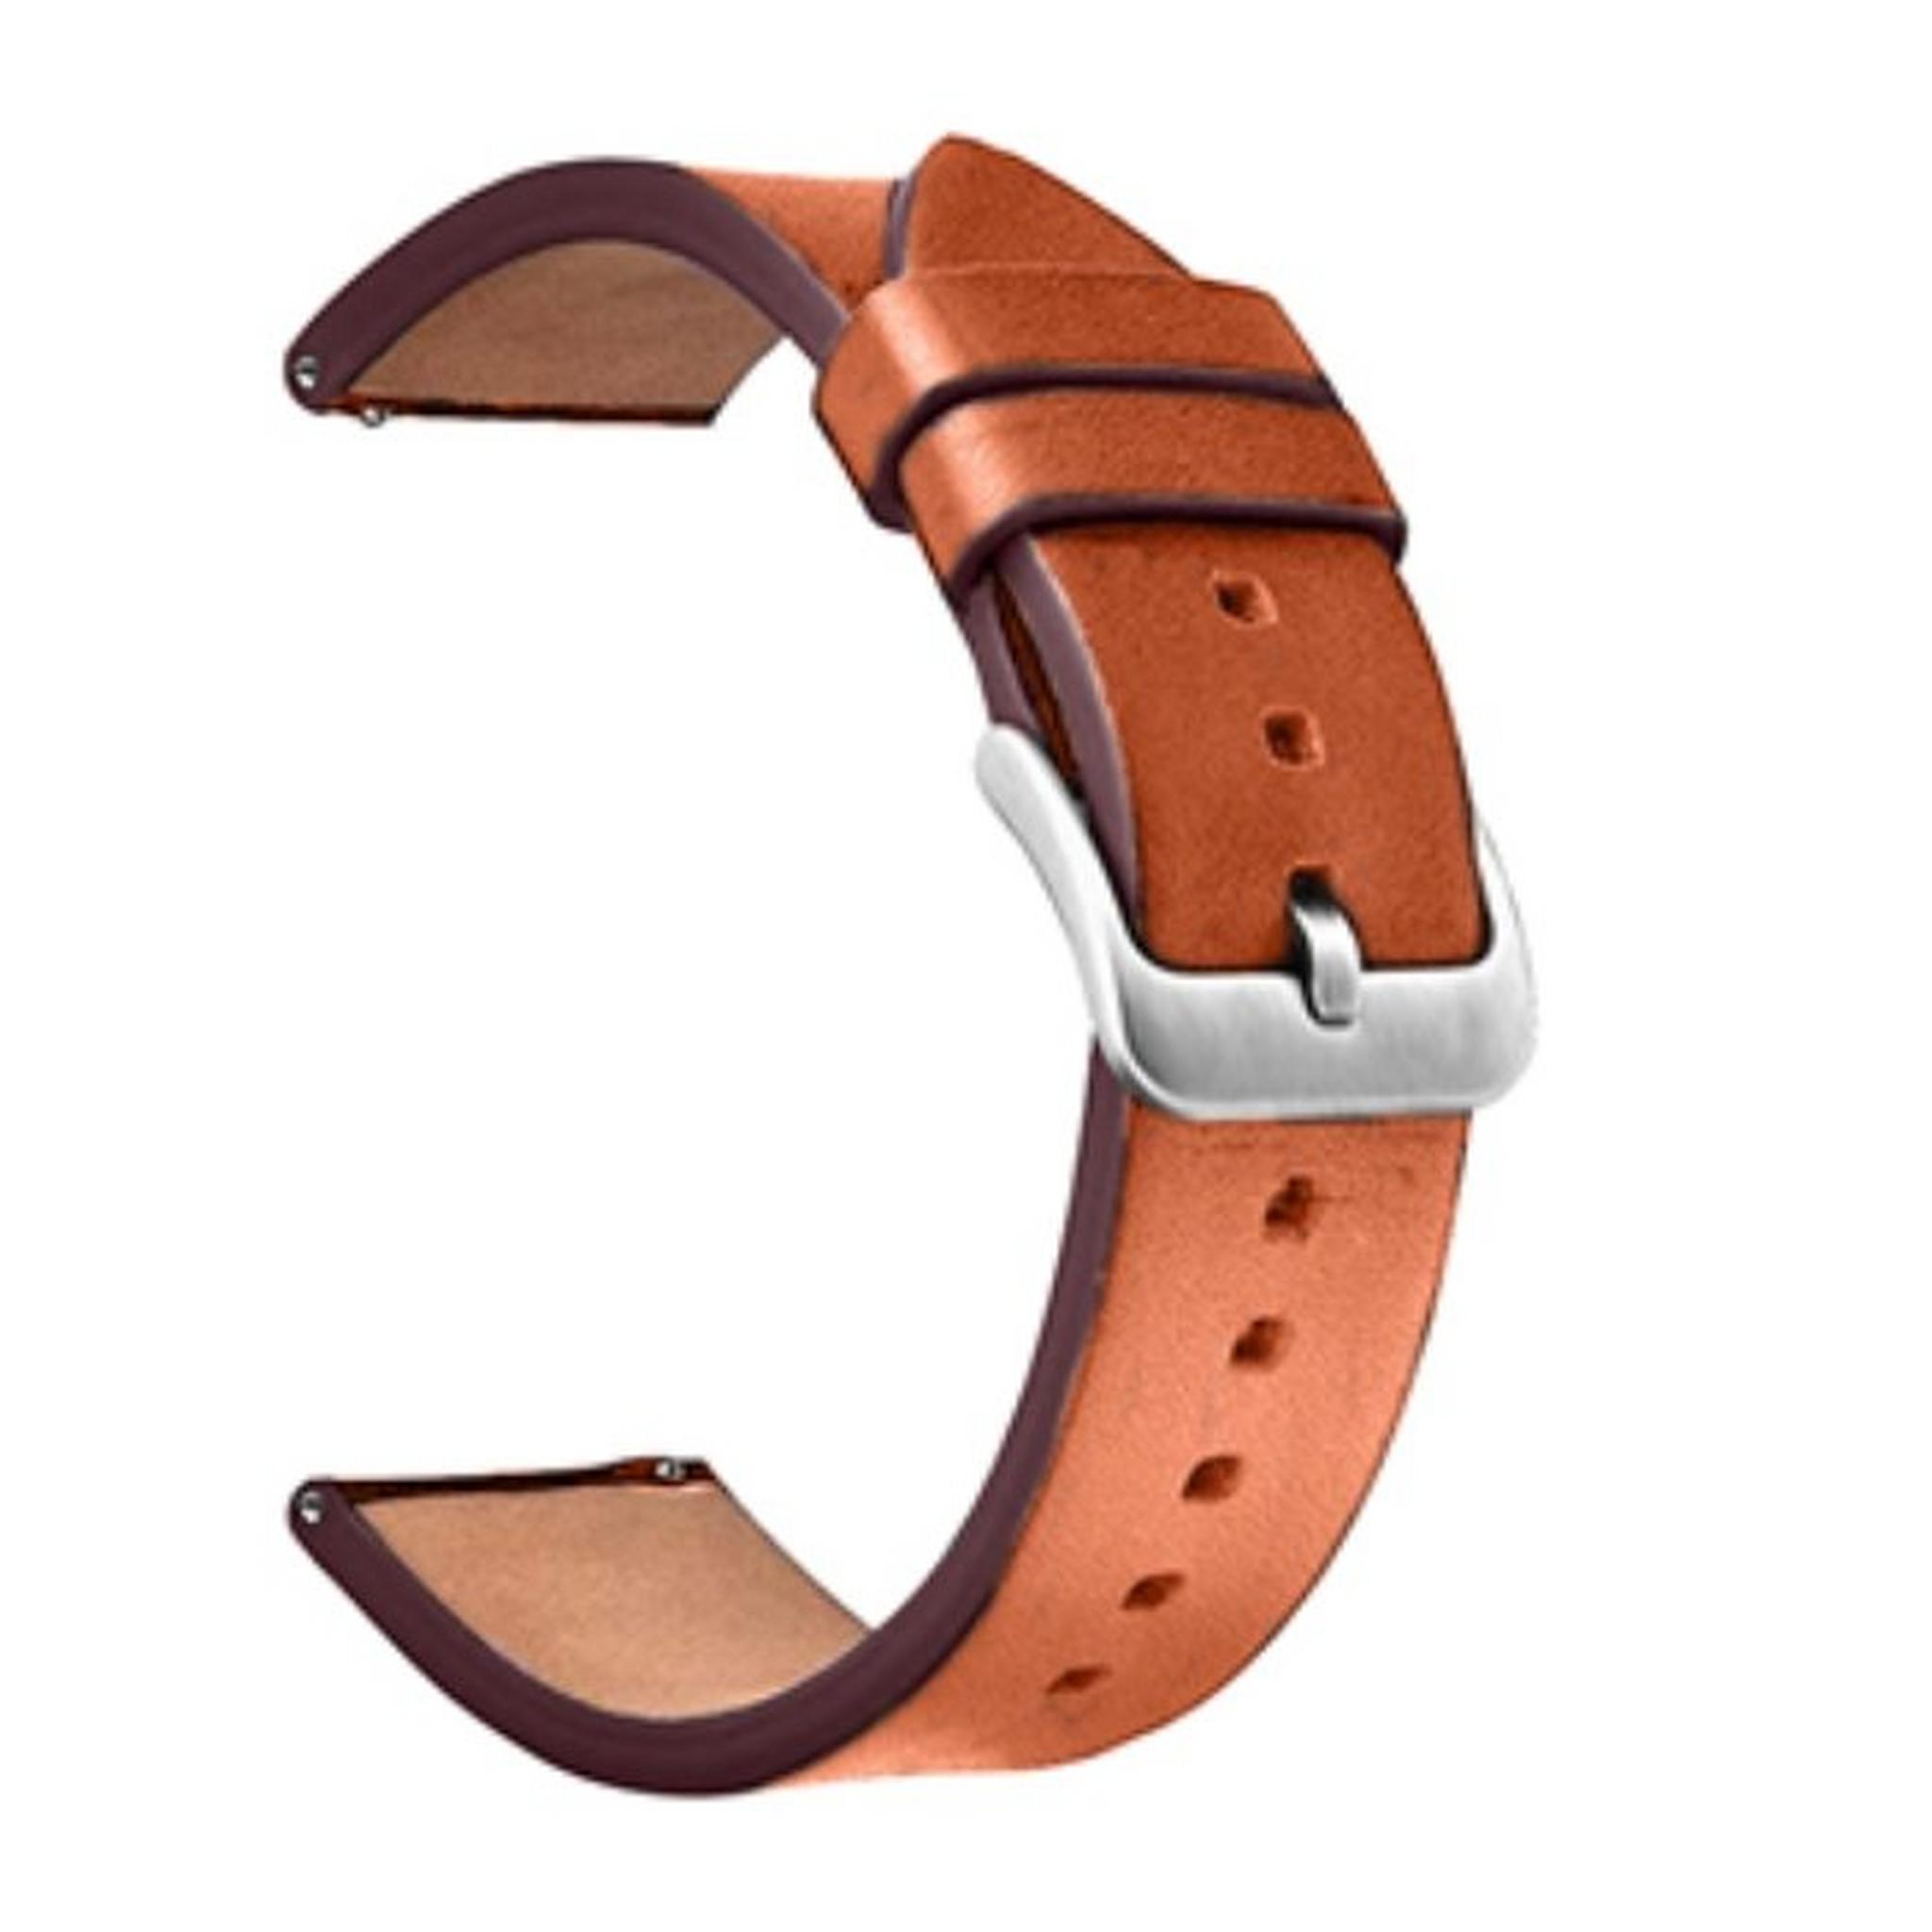 EQ 22mm Pin Leather Watch Band - Brown